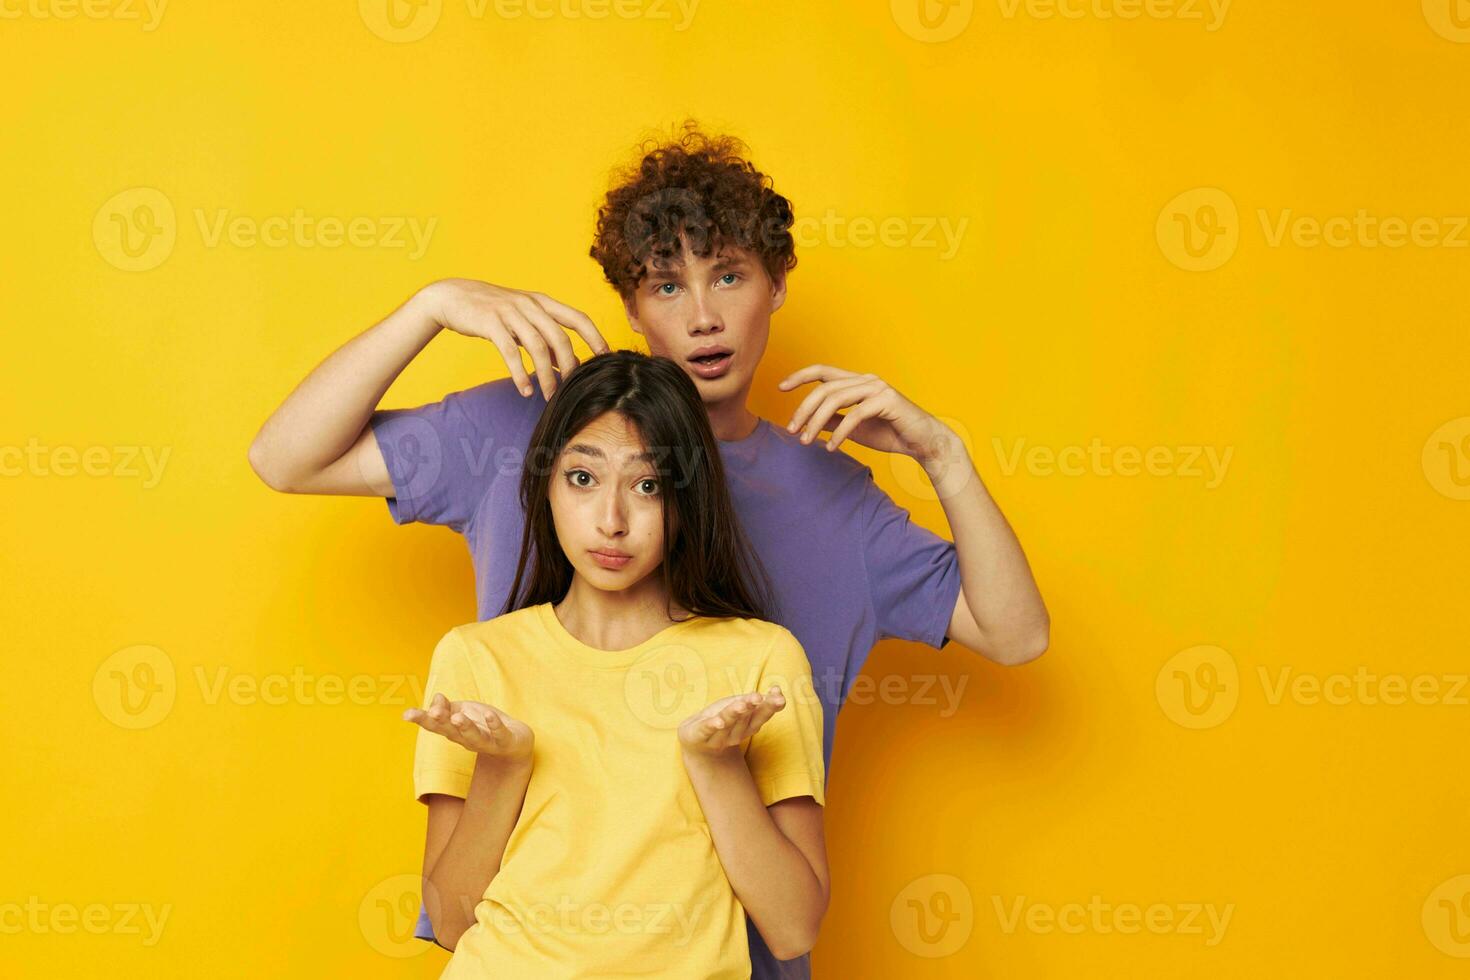 cute young couple Friendship posing fun studio yellow background unaltered photo